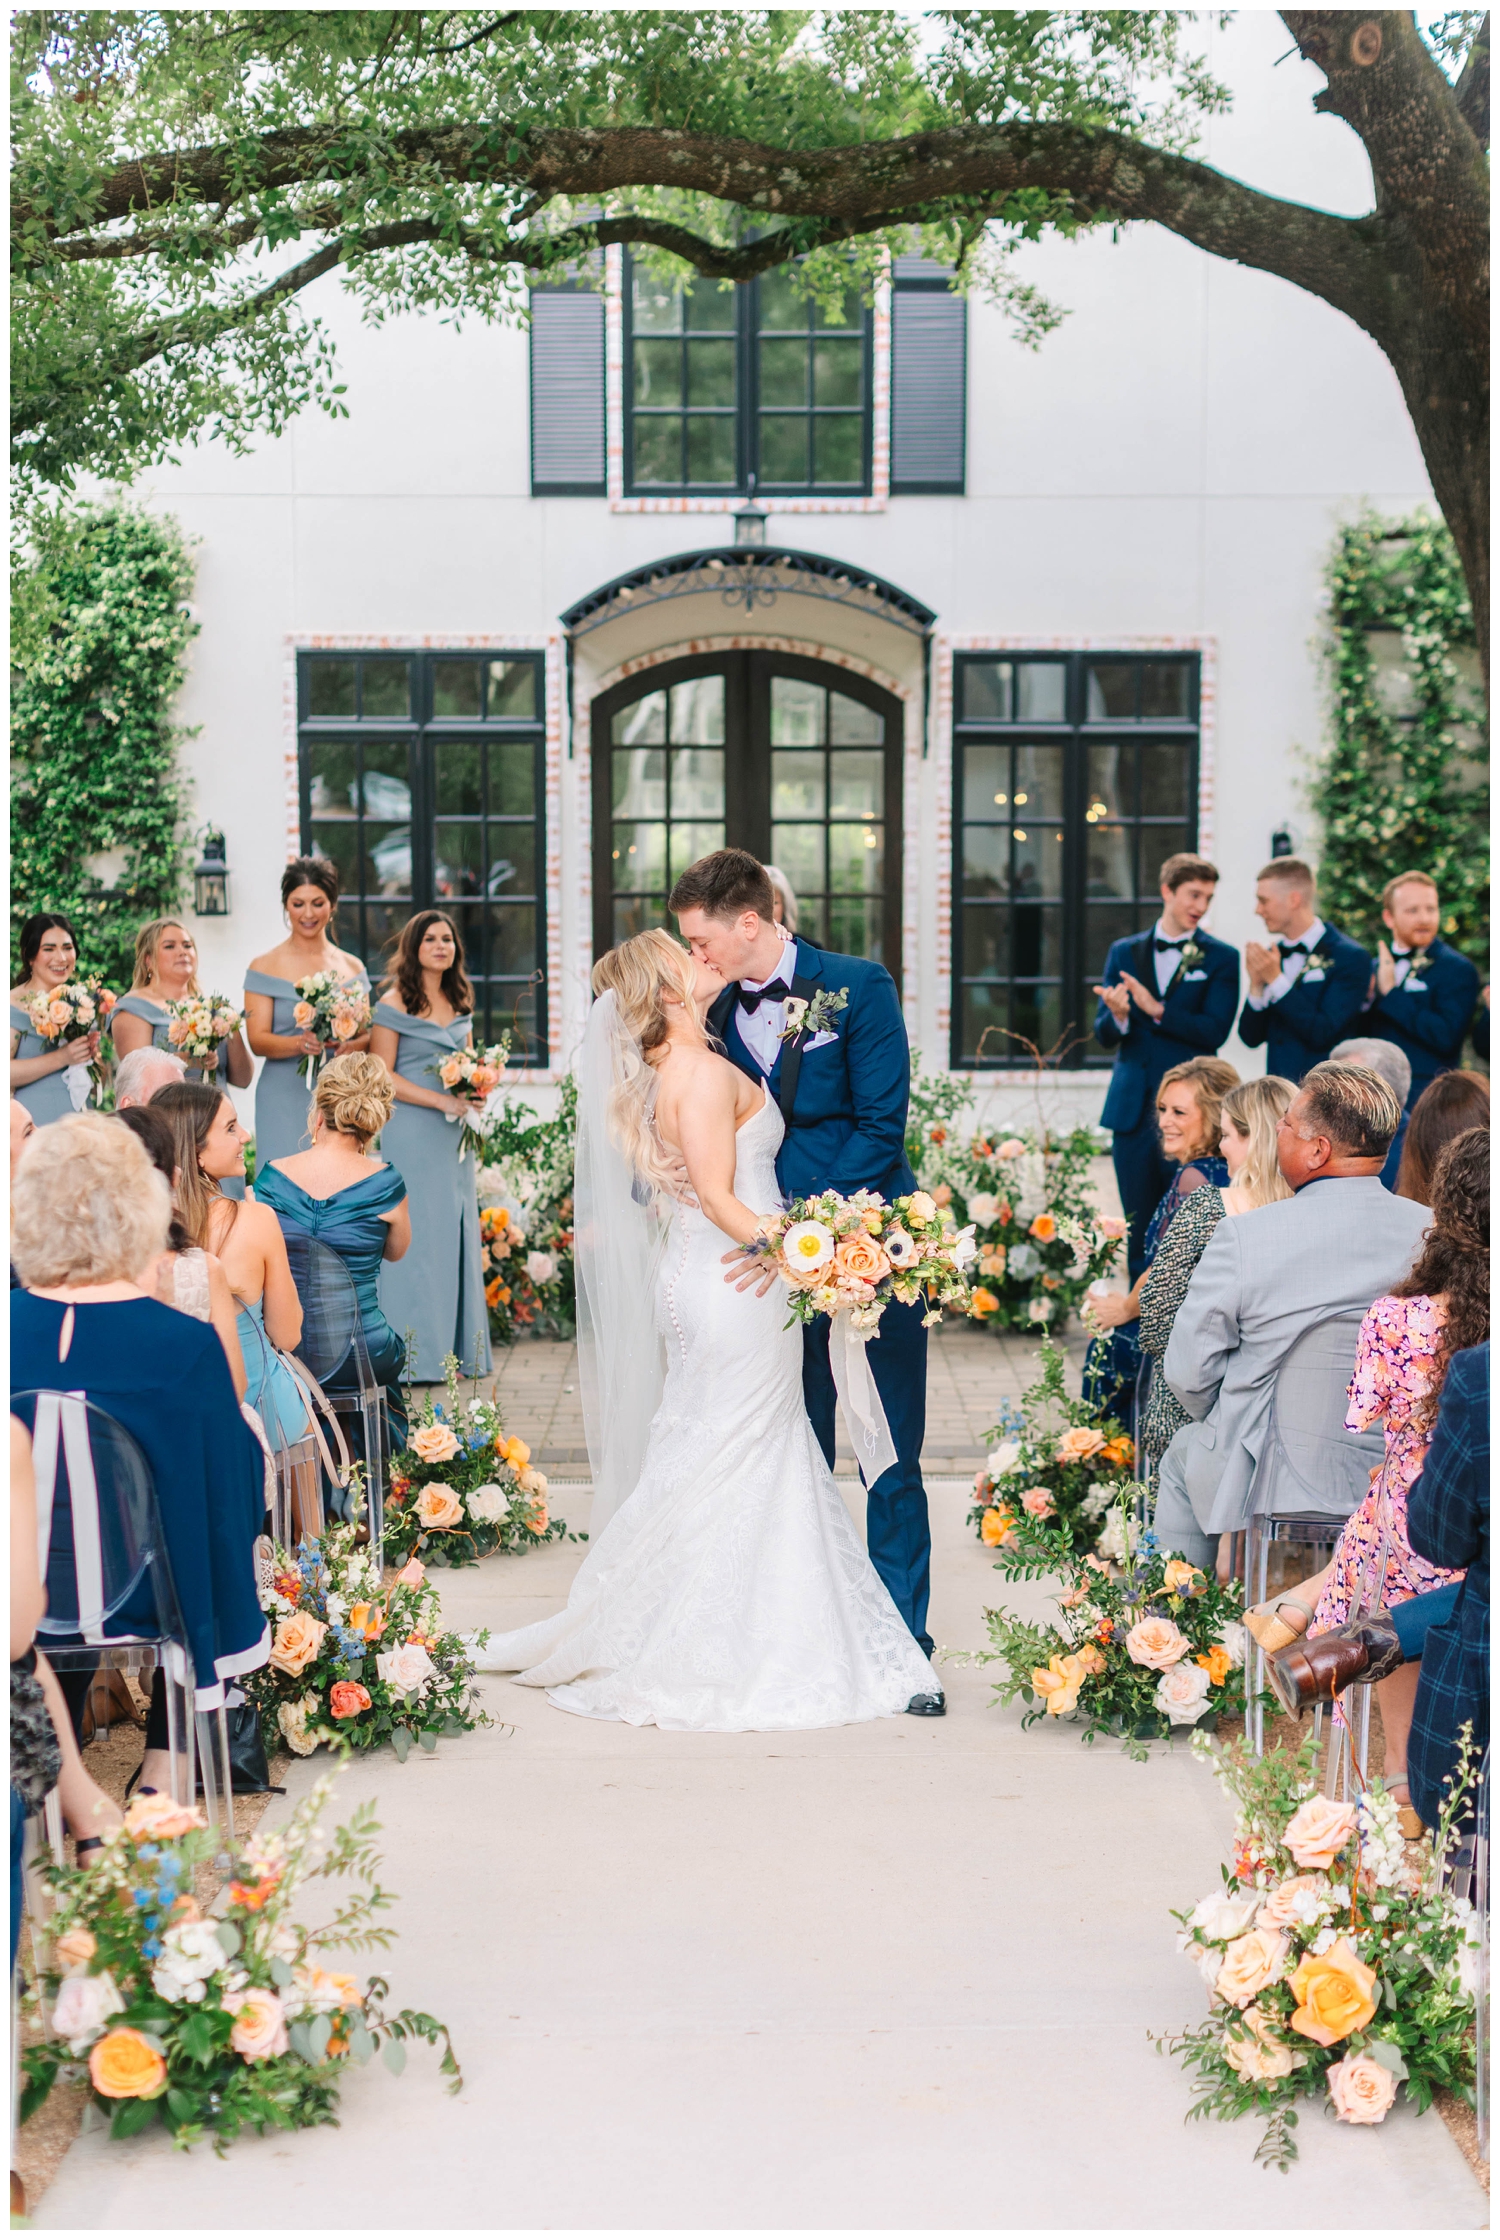 ceremony kiss between bride and groom at The Peach Orchard Wedding Venue